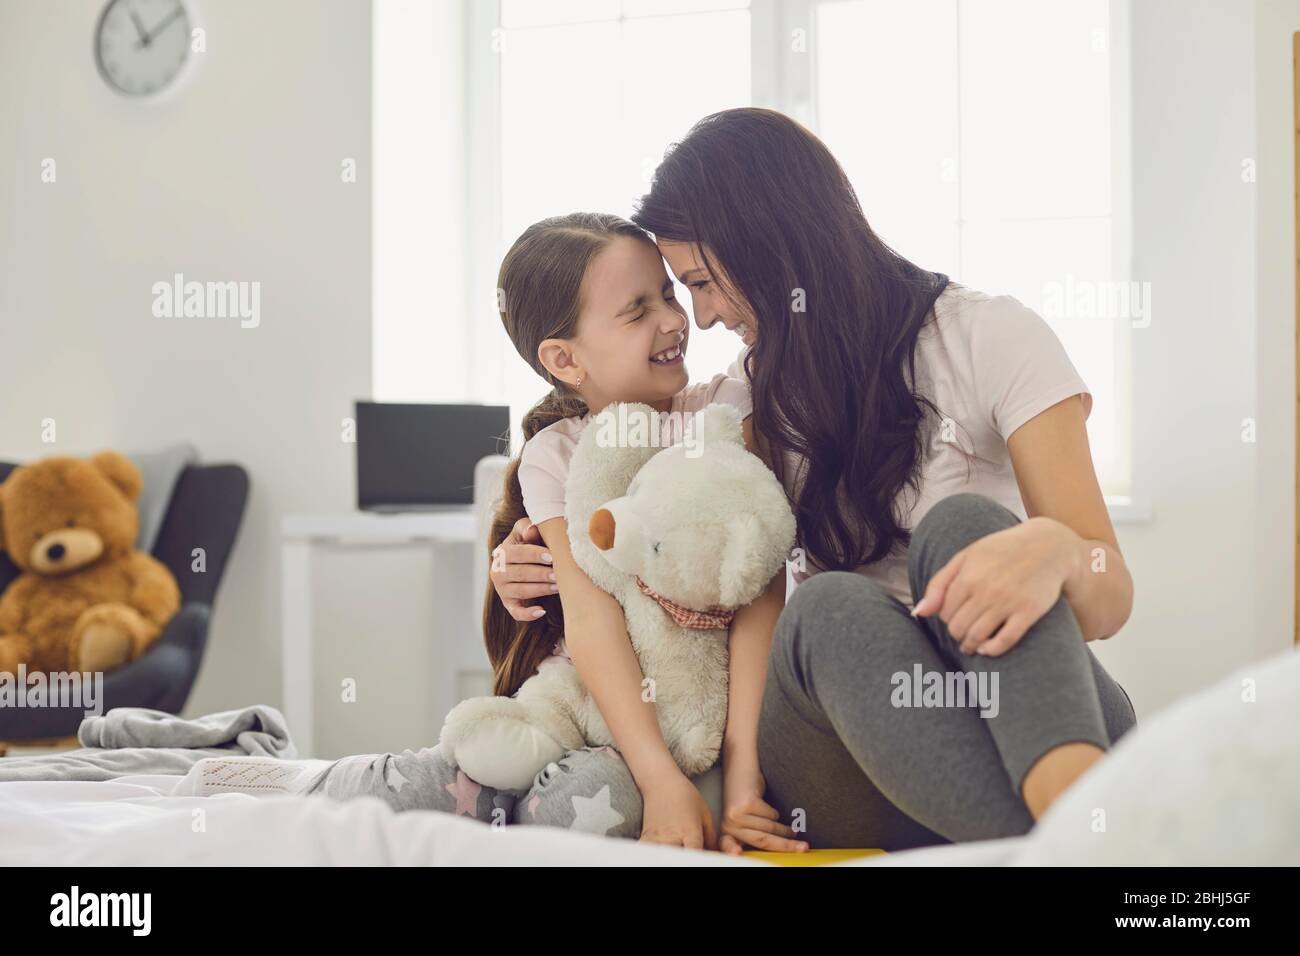 Happy Mother's Day. Happy family. Mother and daughter are hugging while sitting on the bed in a white interior room. Stock Photo